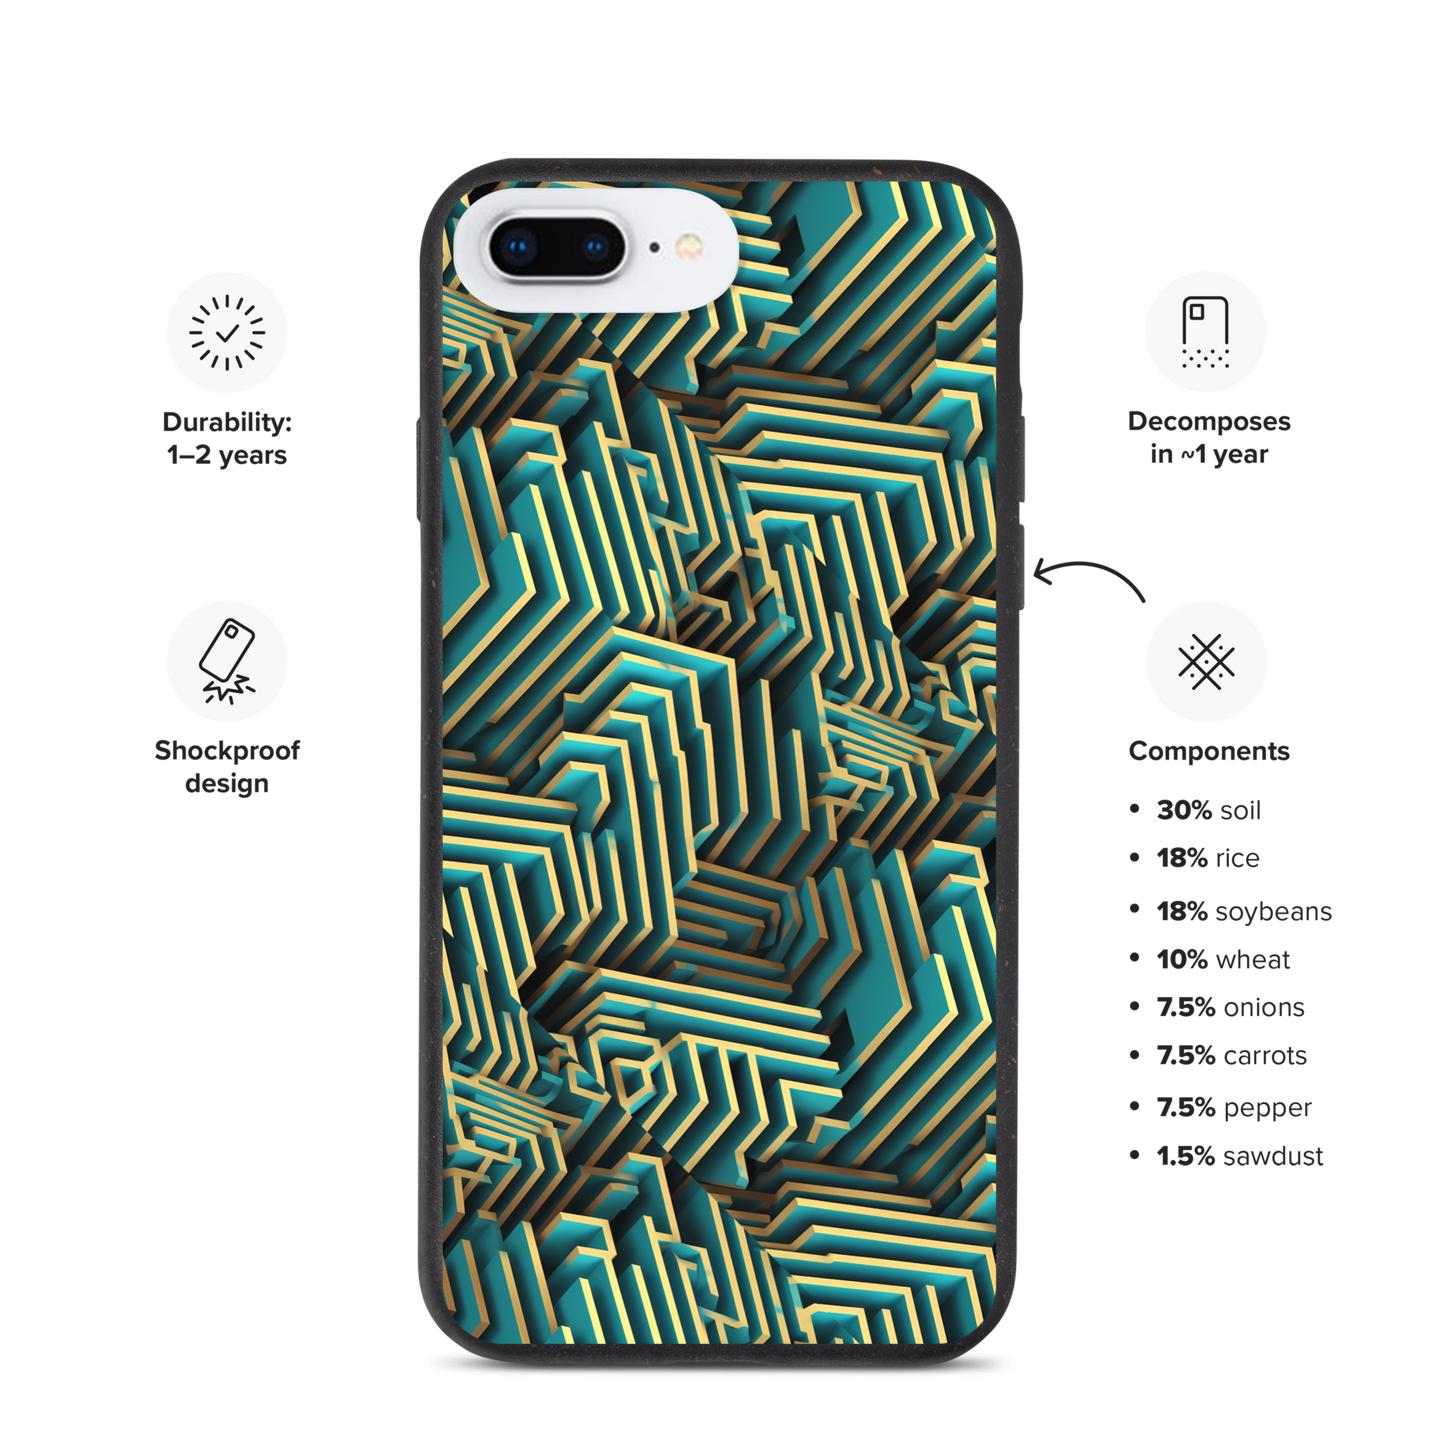 3D Maze Illusion | 3D Patterns | Speckled Case for iPhone - #5